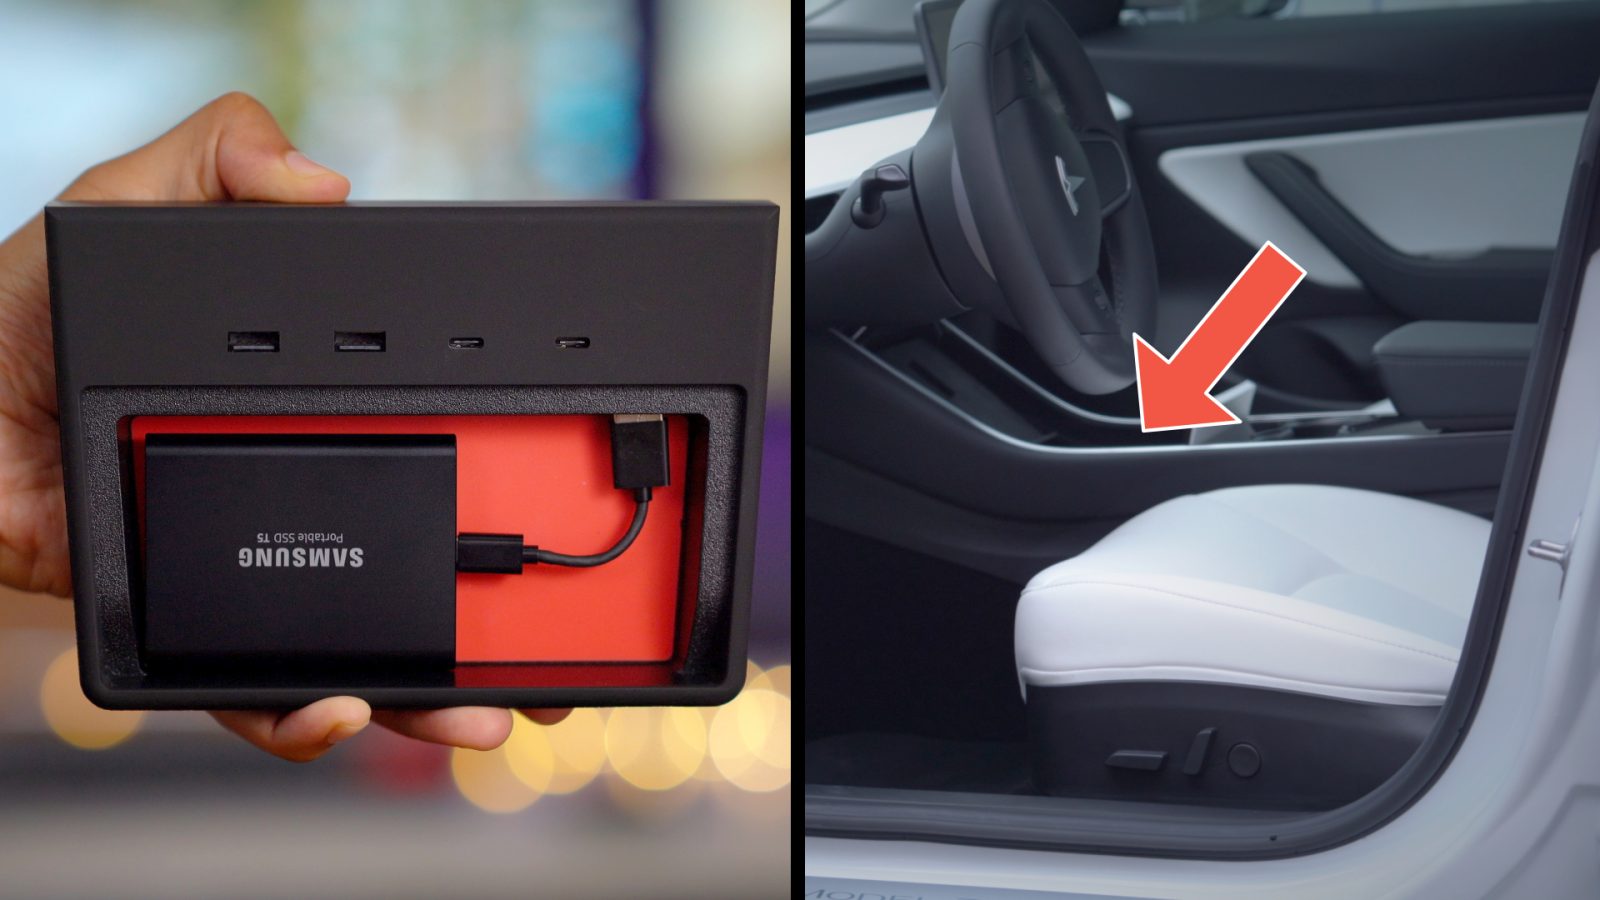 Review: Jeda USB Hub – a must-have accessory for the Tesla Model 3 [Video]